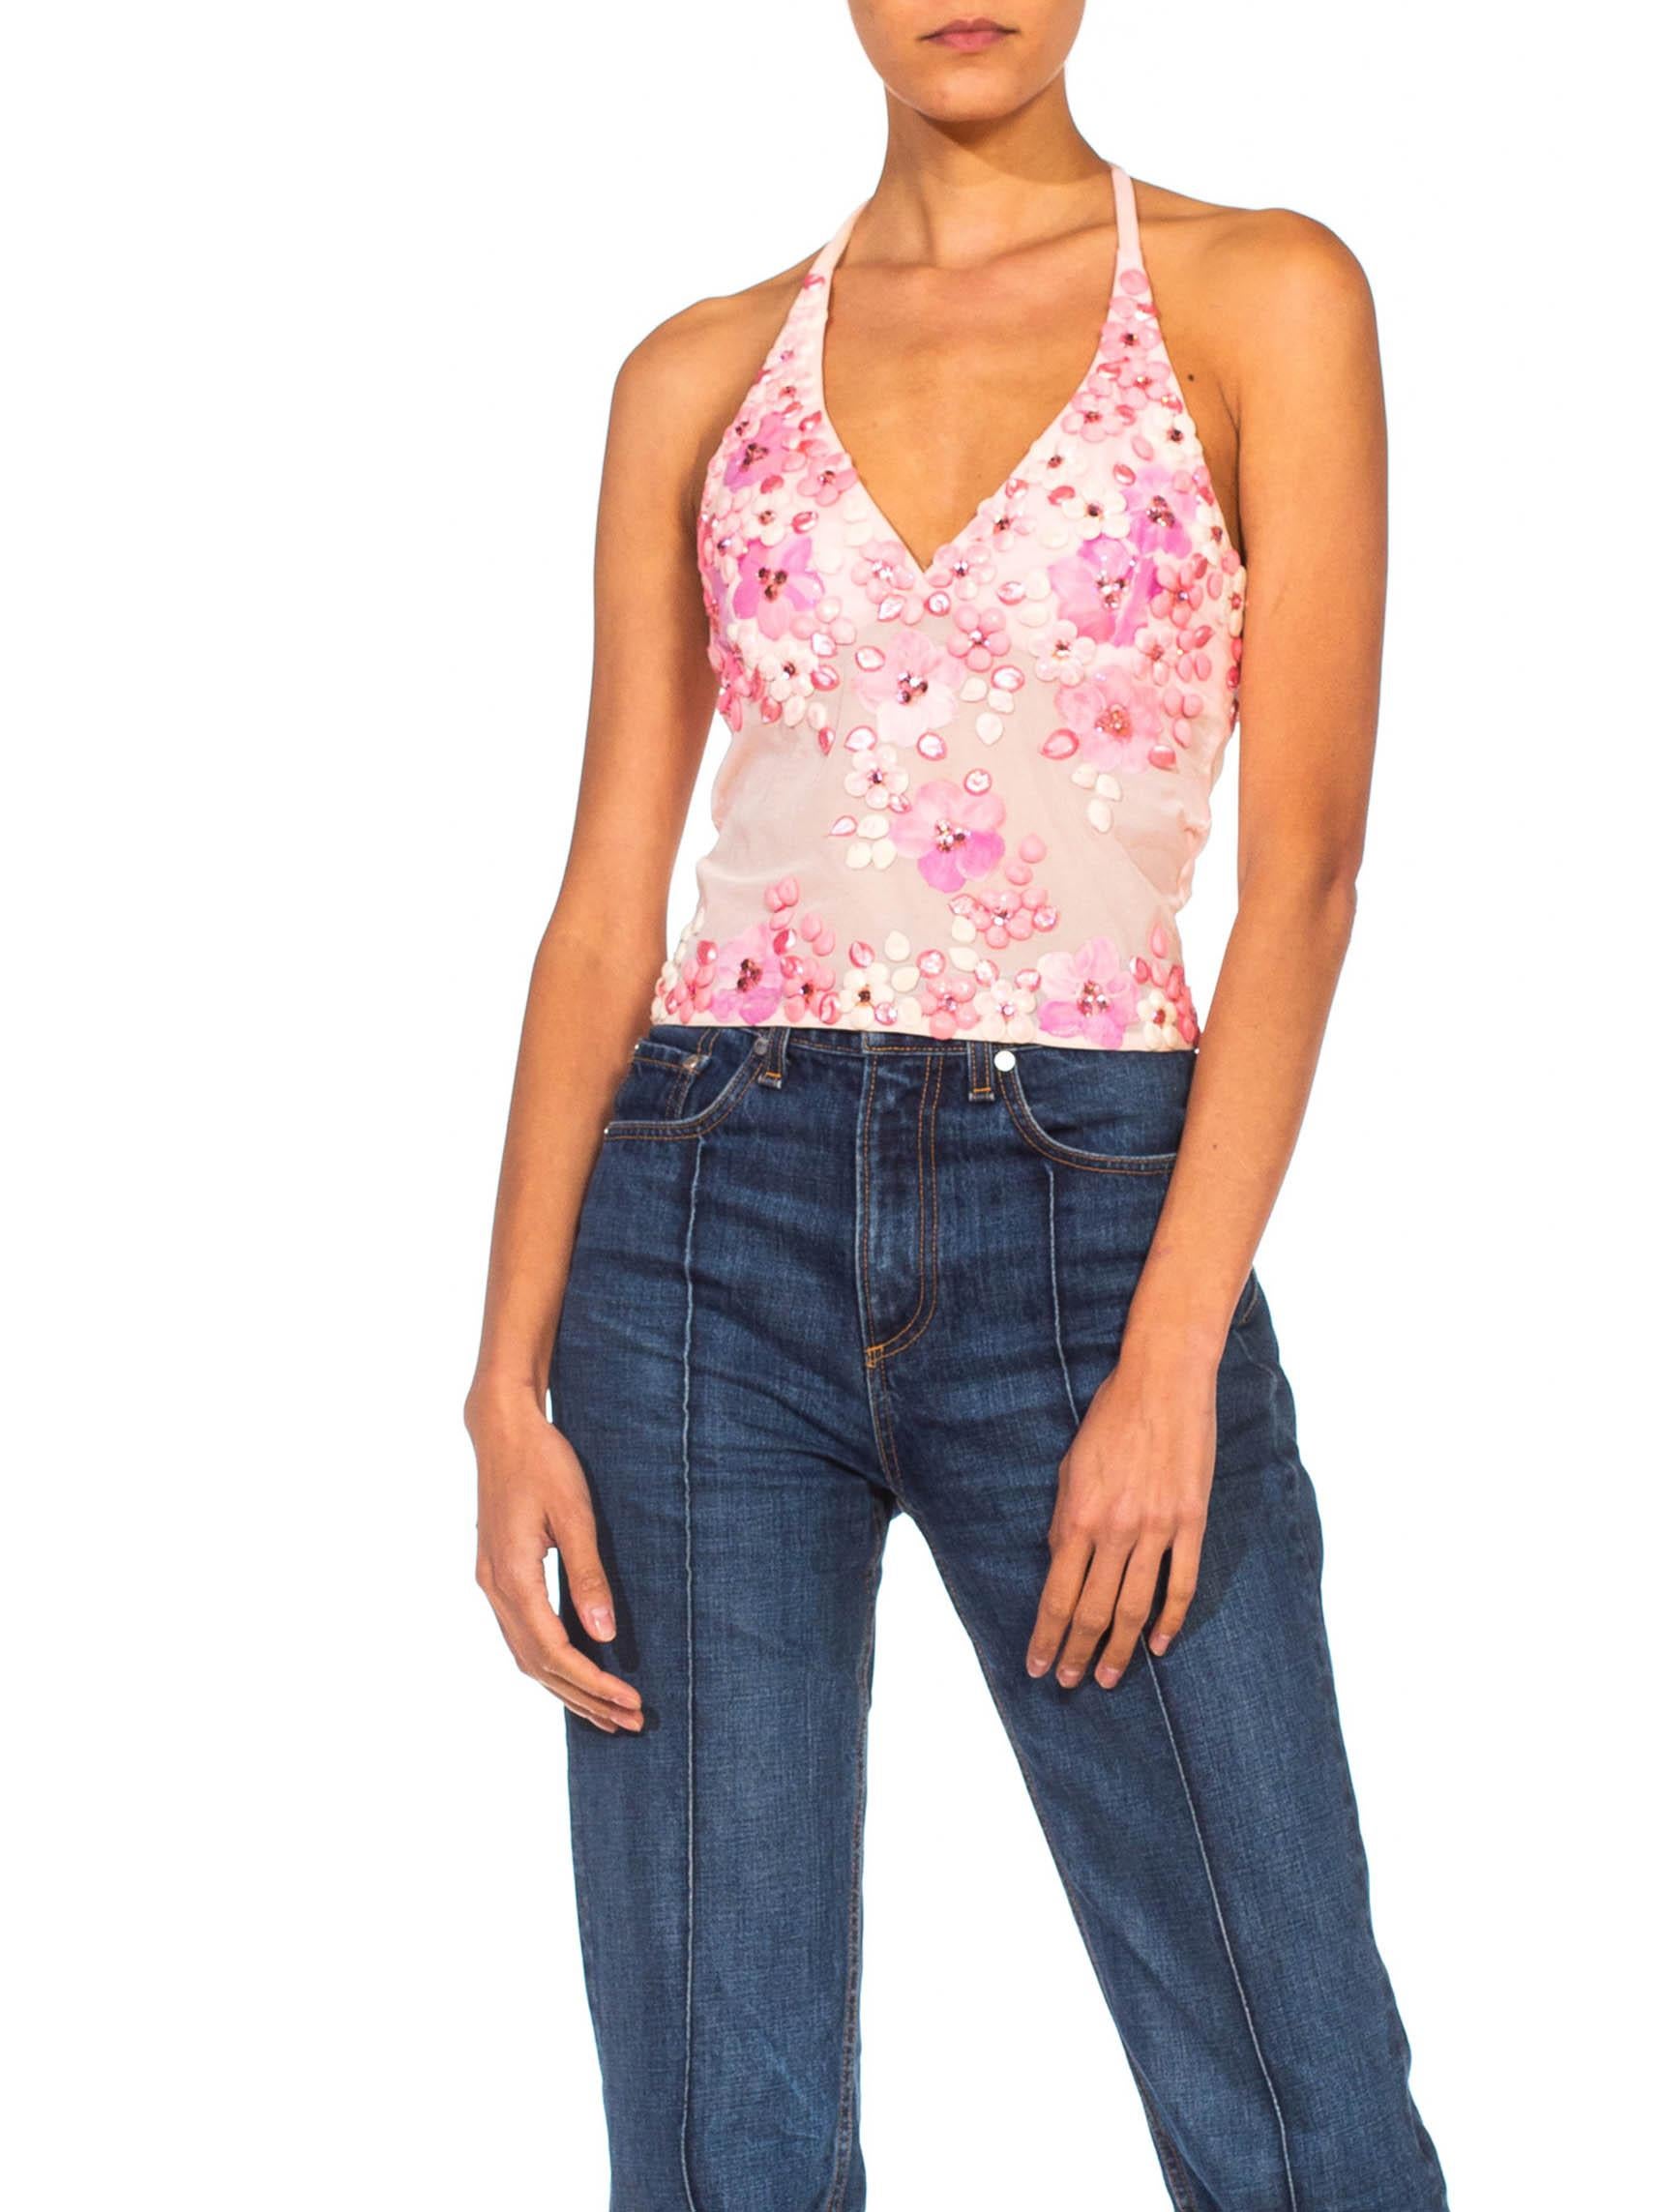 1990S Pink Stretch Net Paris Hilton Puffy Paint Flower Top With Crystals 2